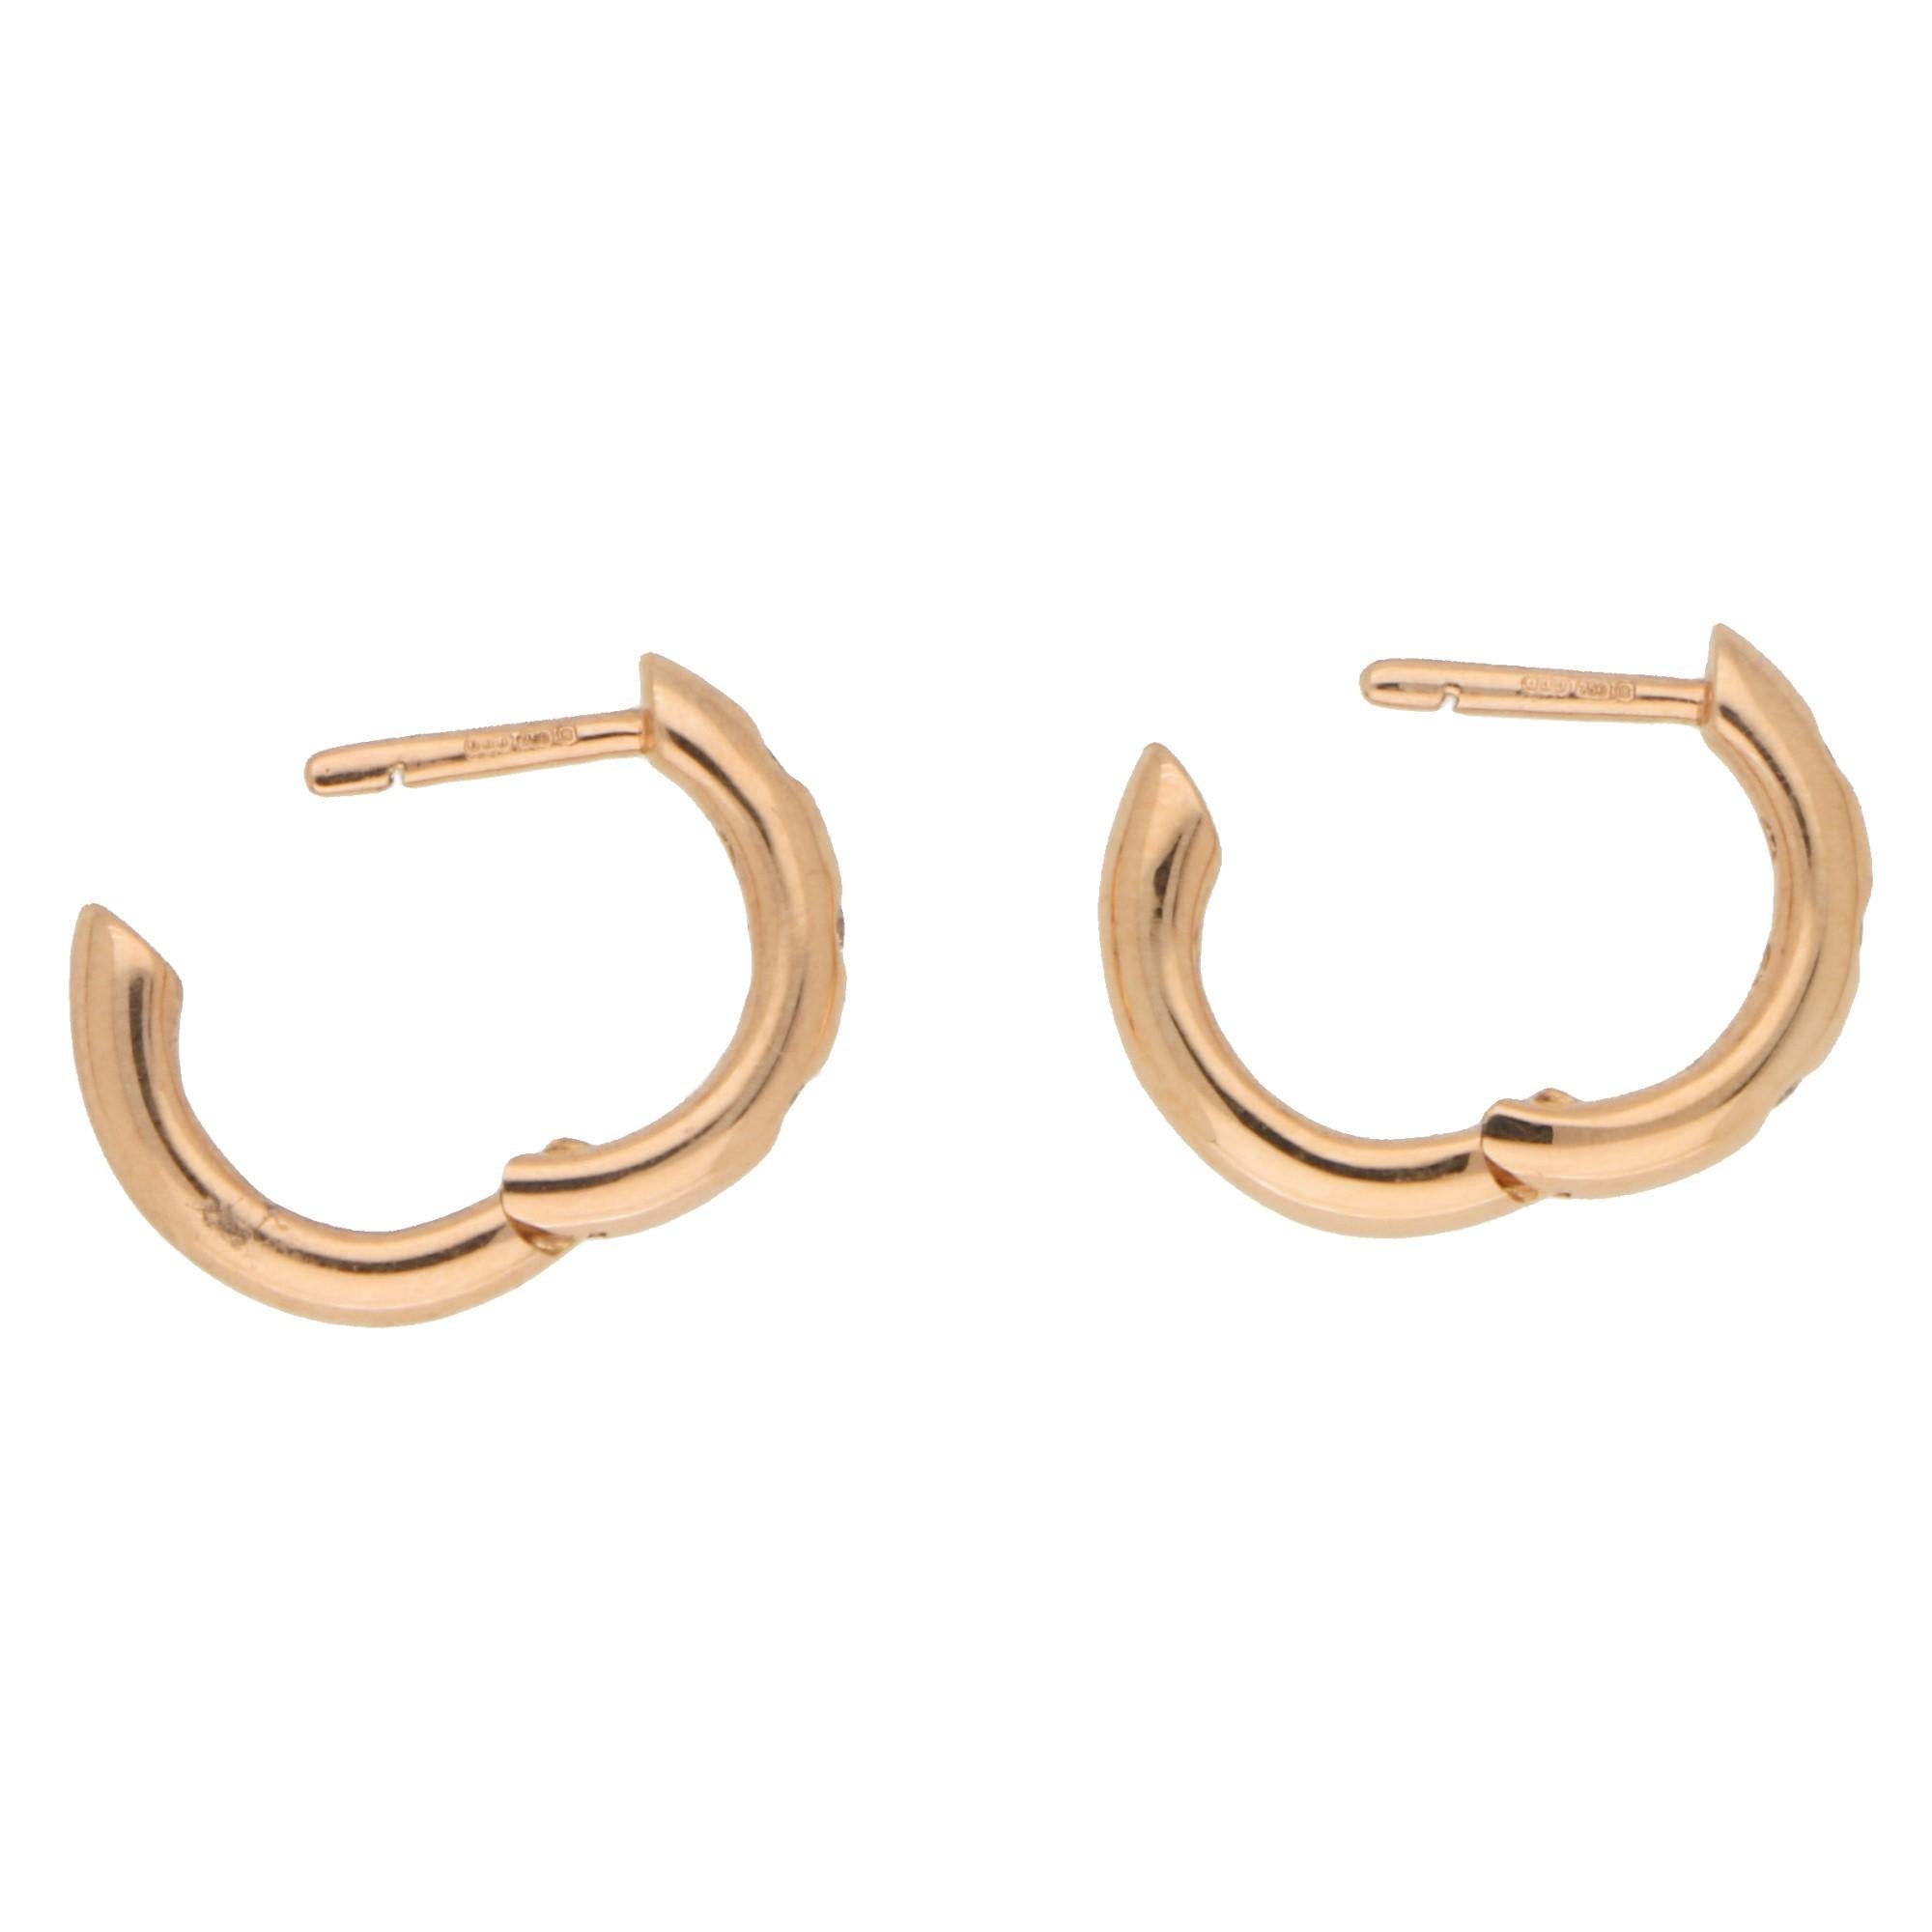 A super pair of everyday diamond huggy hoop earrings set in 18k rose gold.

Each hoop earring is evenly rub-over set with 3 round brilliant cut diamonds secured with a post and click shut fitting. Due to their size these earrings would make an ideal